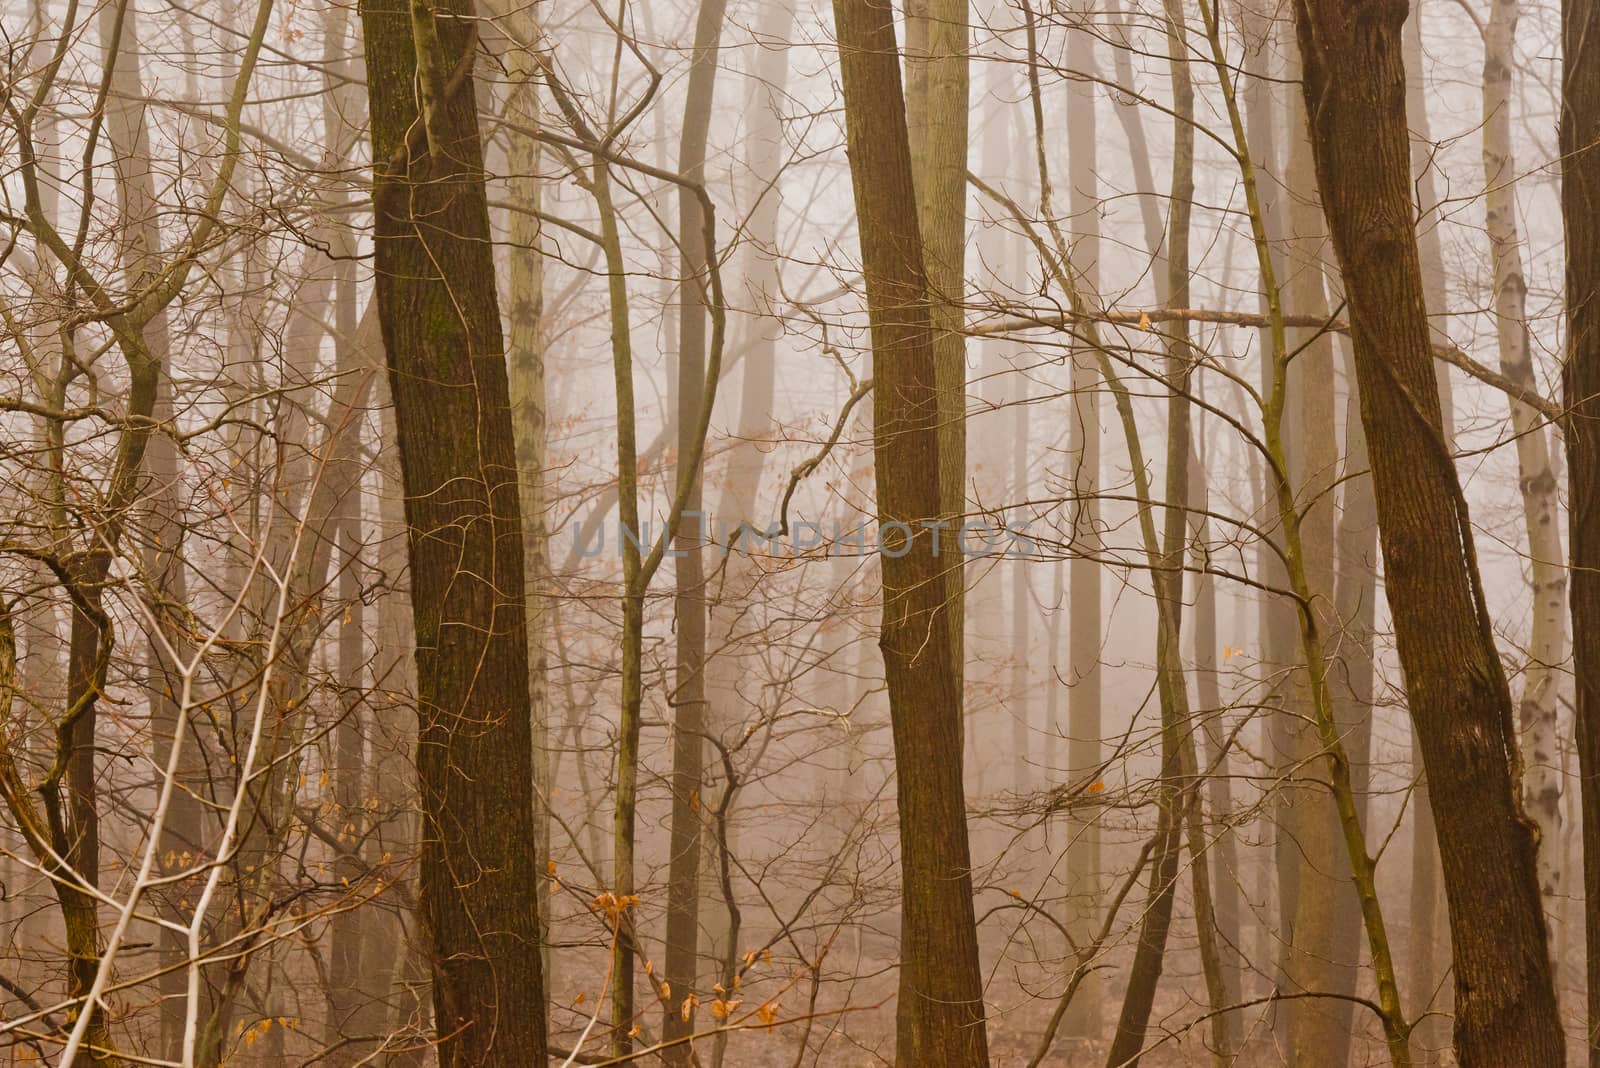 Dark and mysterious foggy forest in late fall.